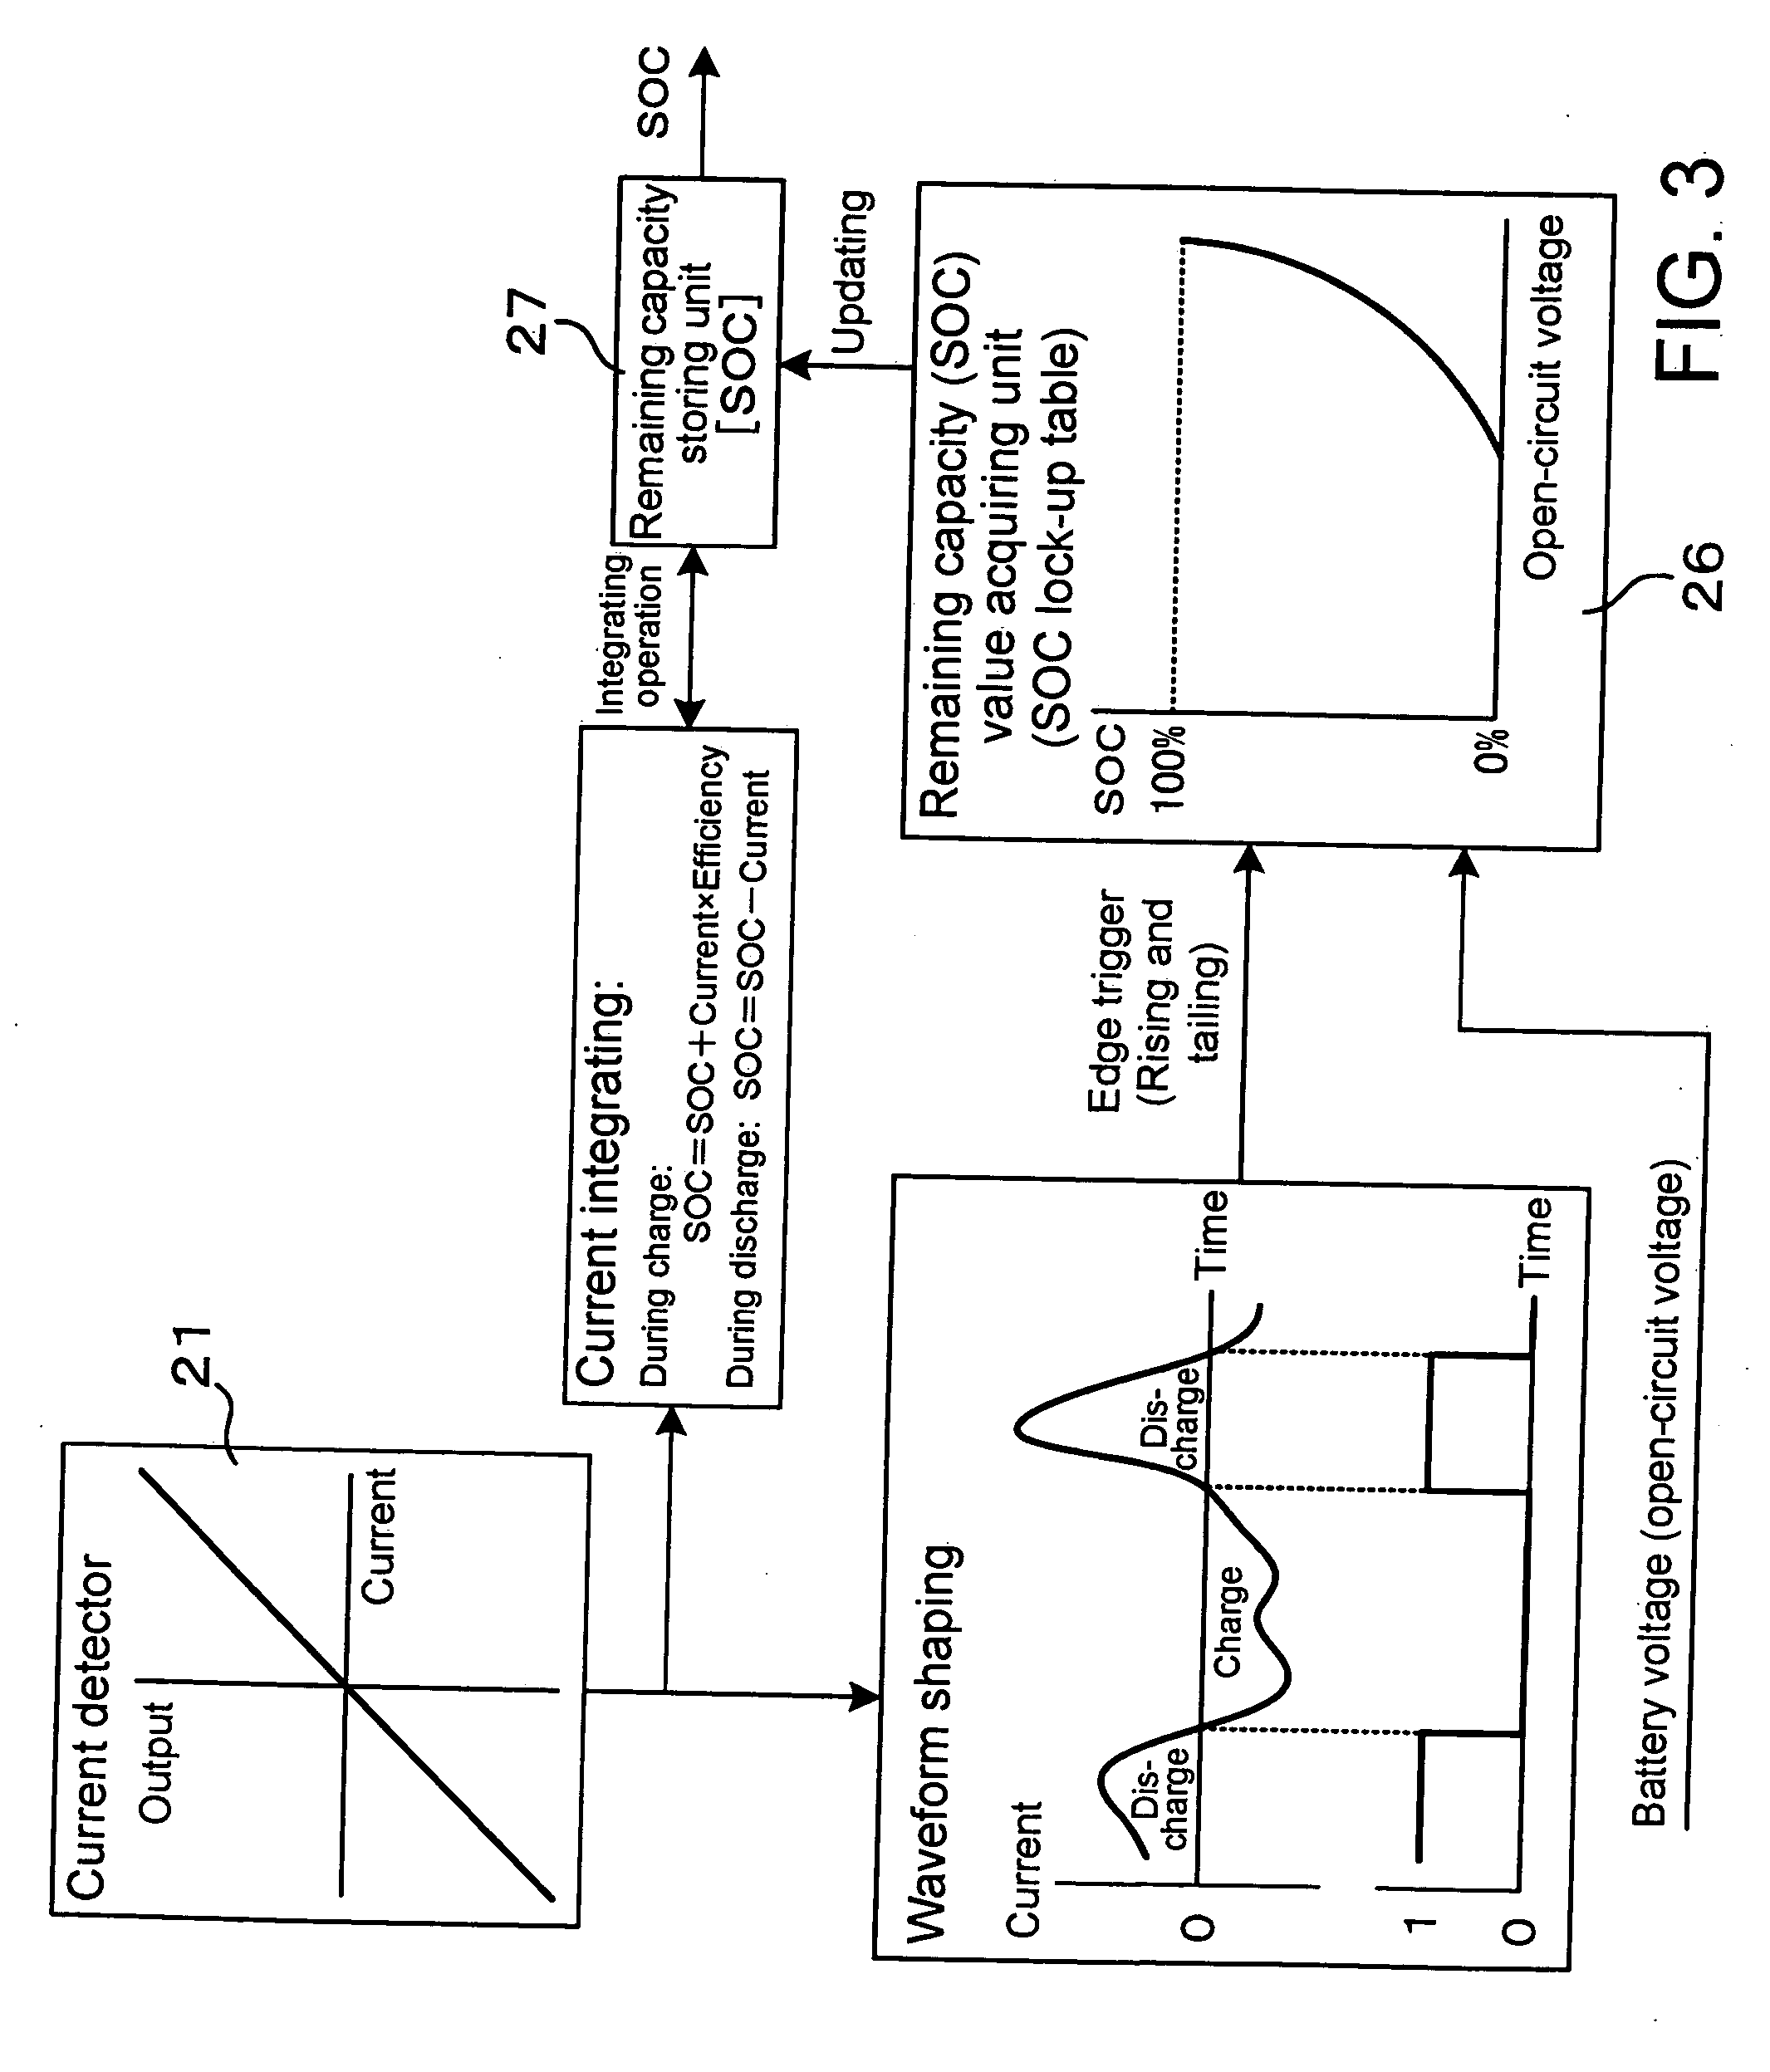 Method and apparatus for estimating remaining capacity of electric storage